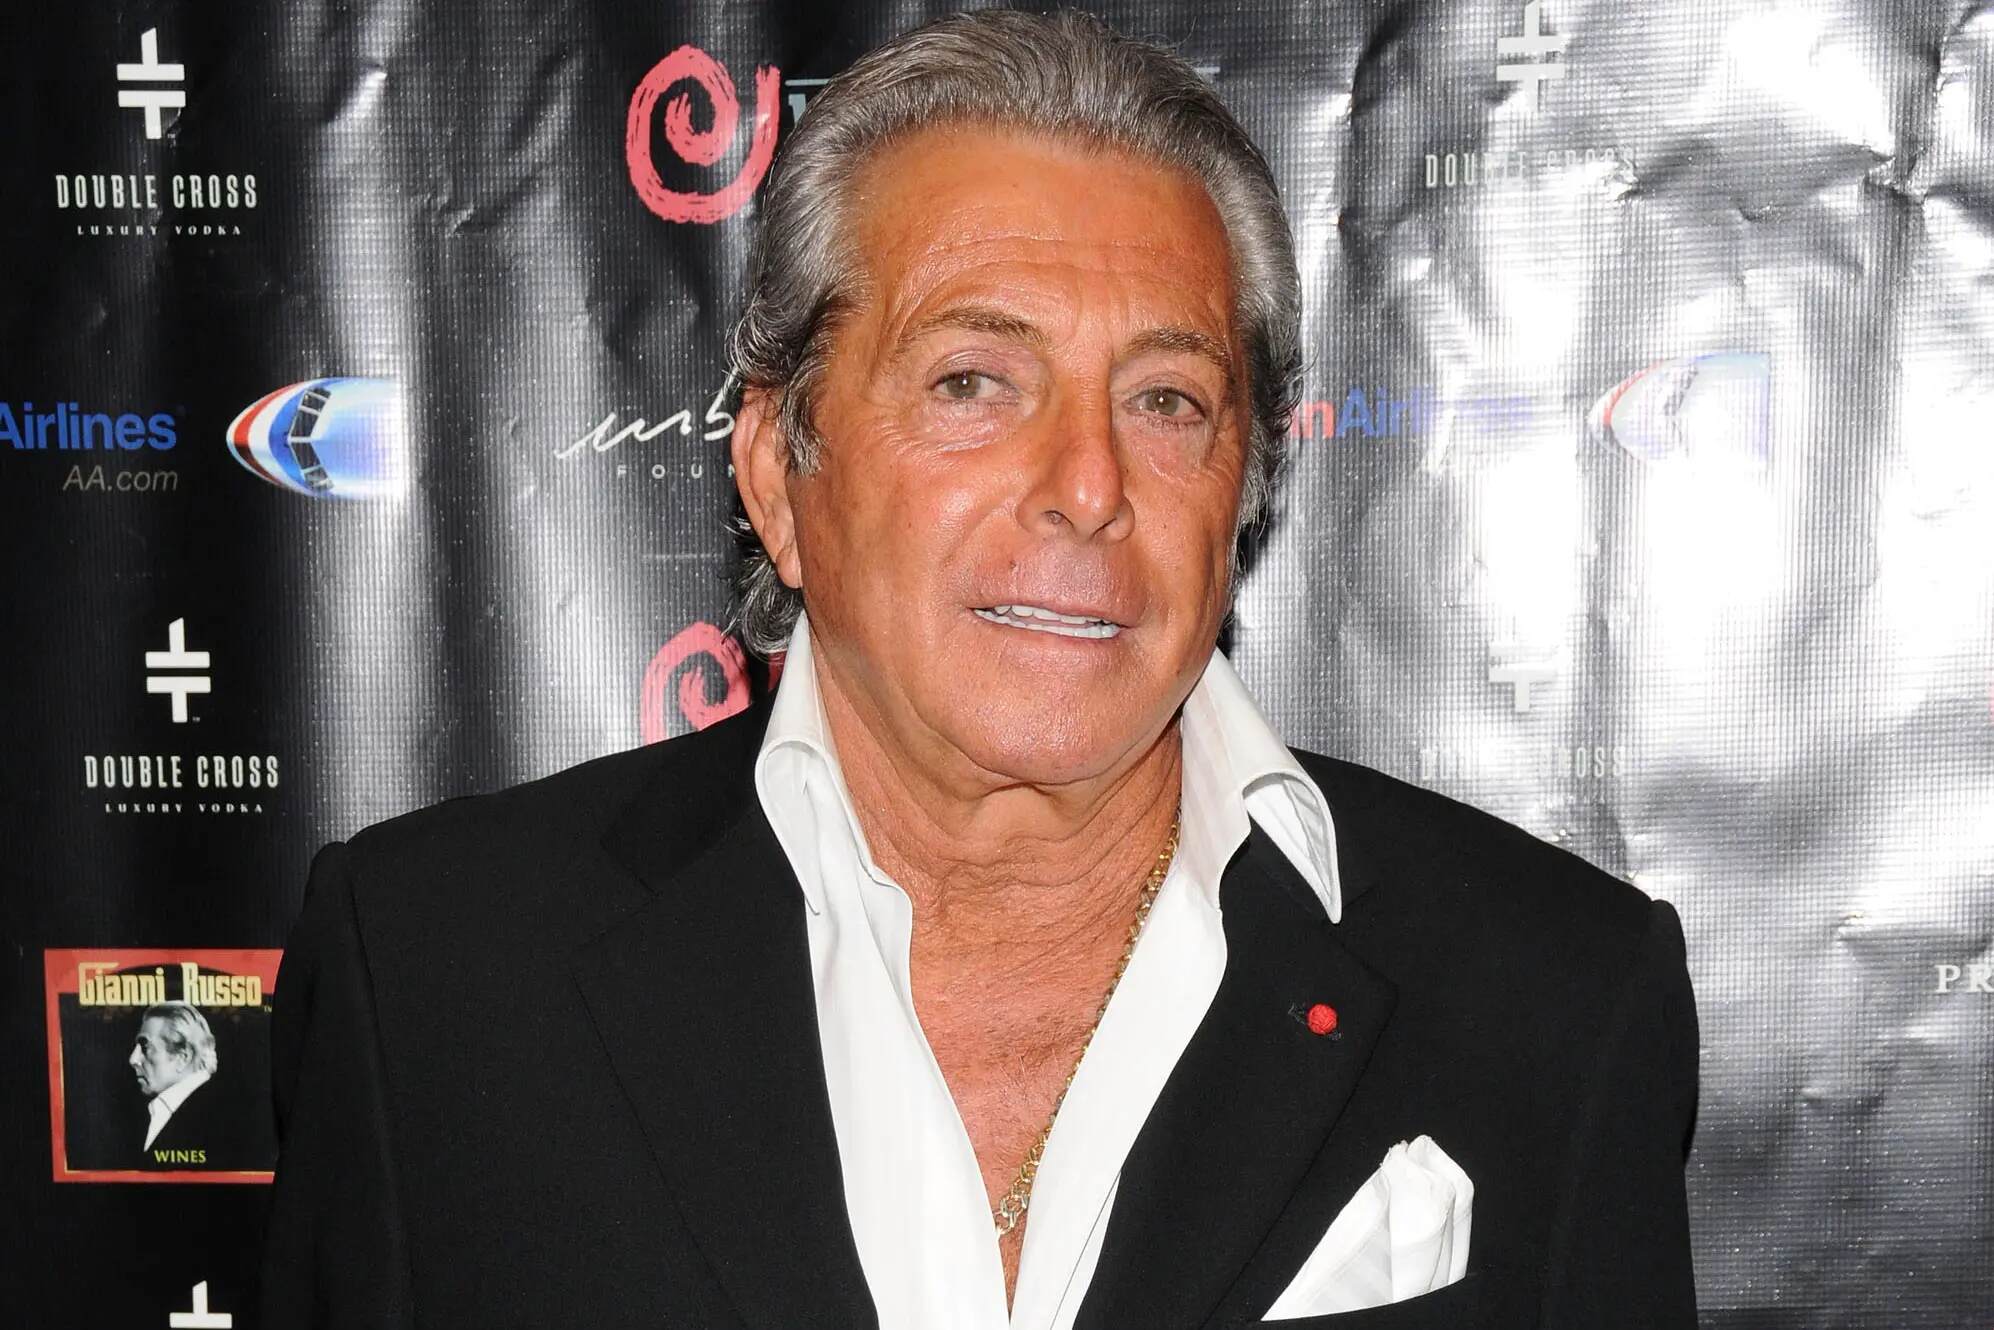 21-captivating-facts-about-gianni-russo